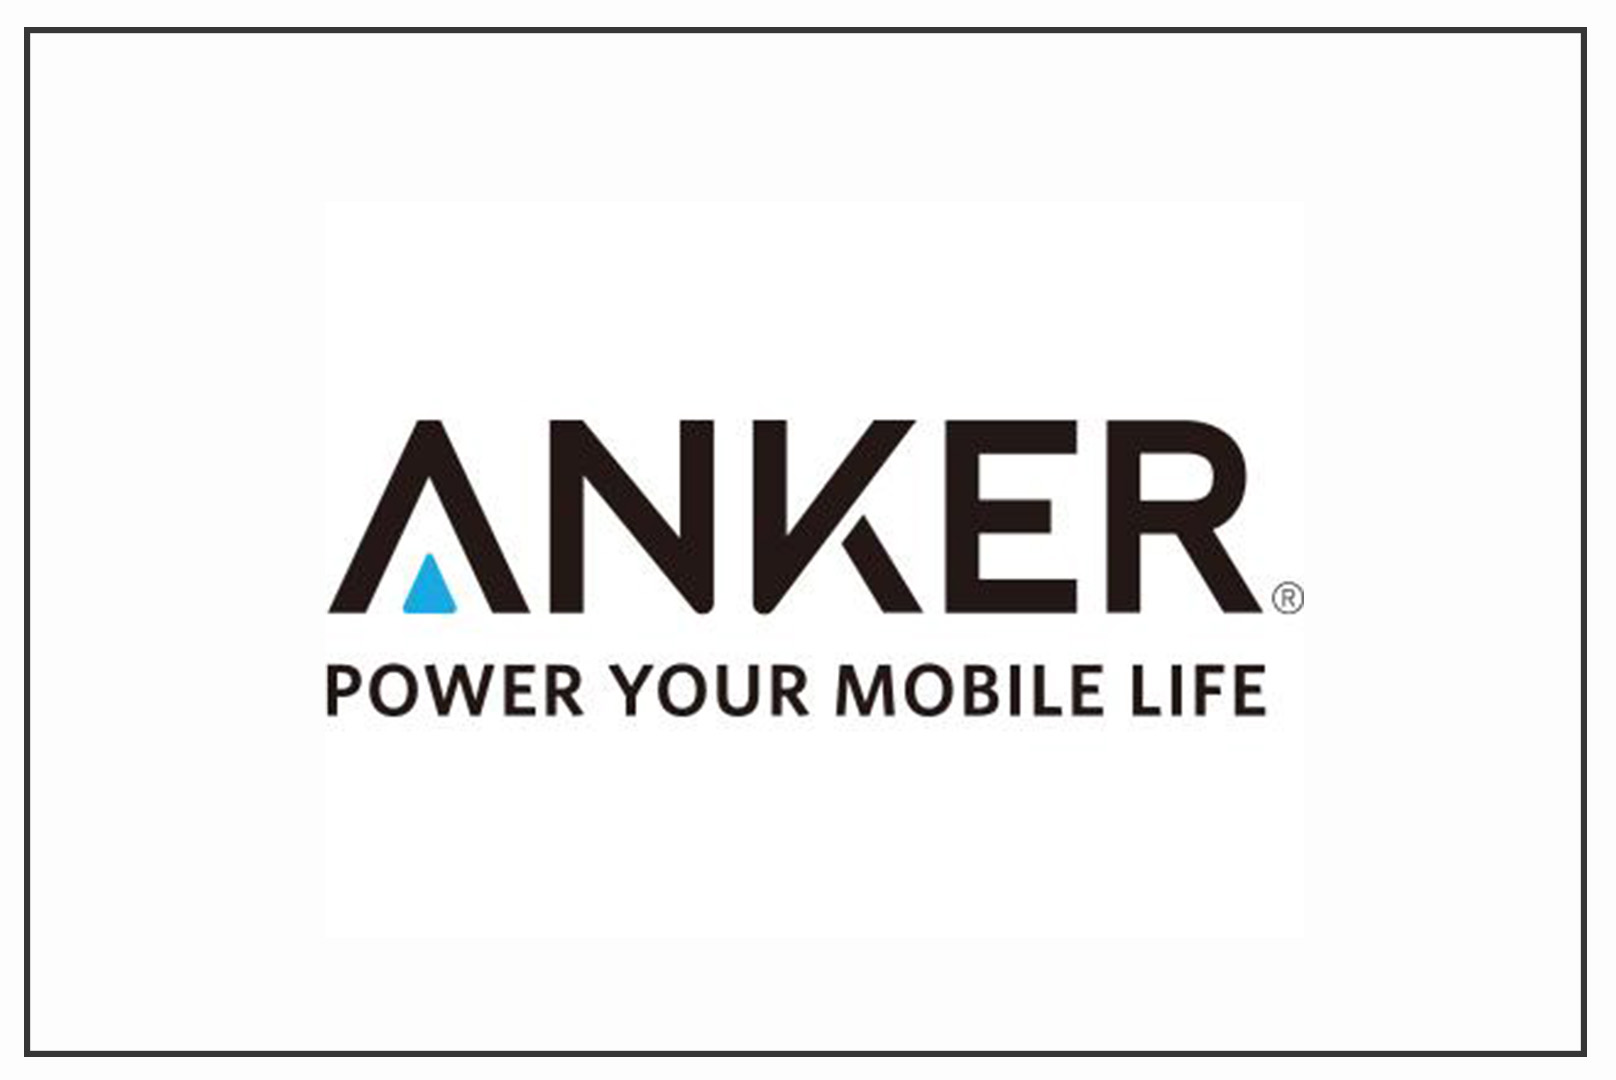 Ankersale